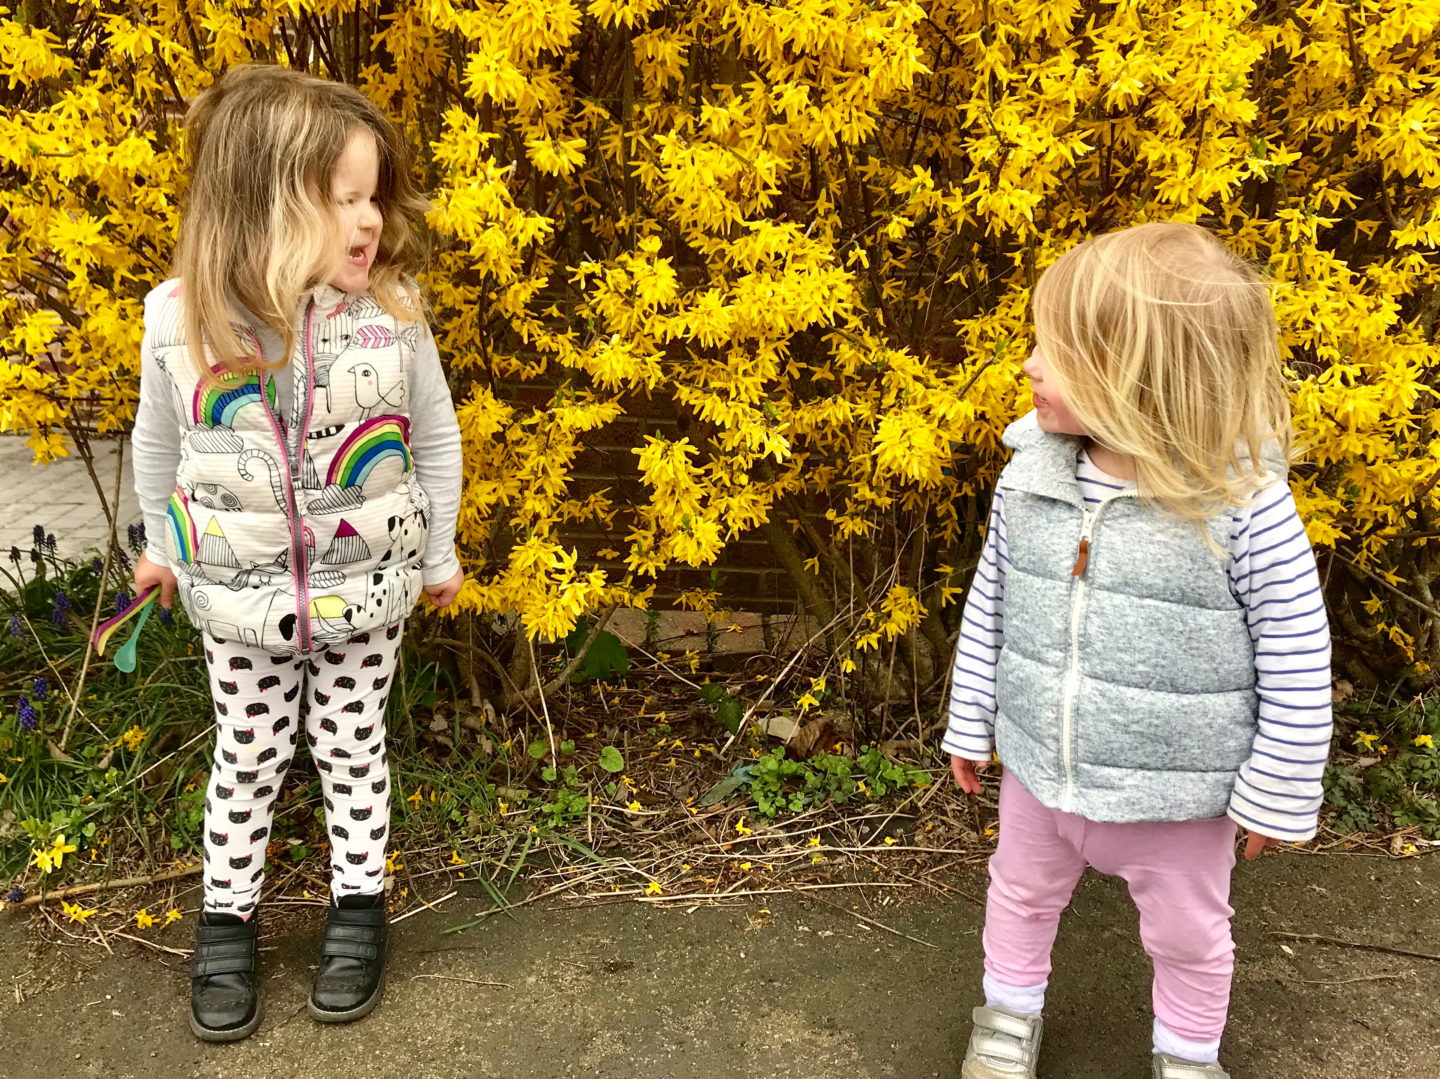 Two sisters standing in front of a yellow flowering bush, looking at one another, giggling